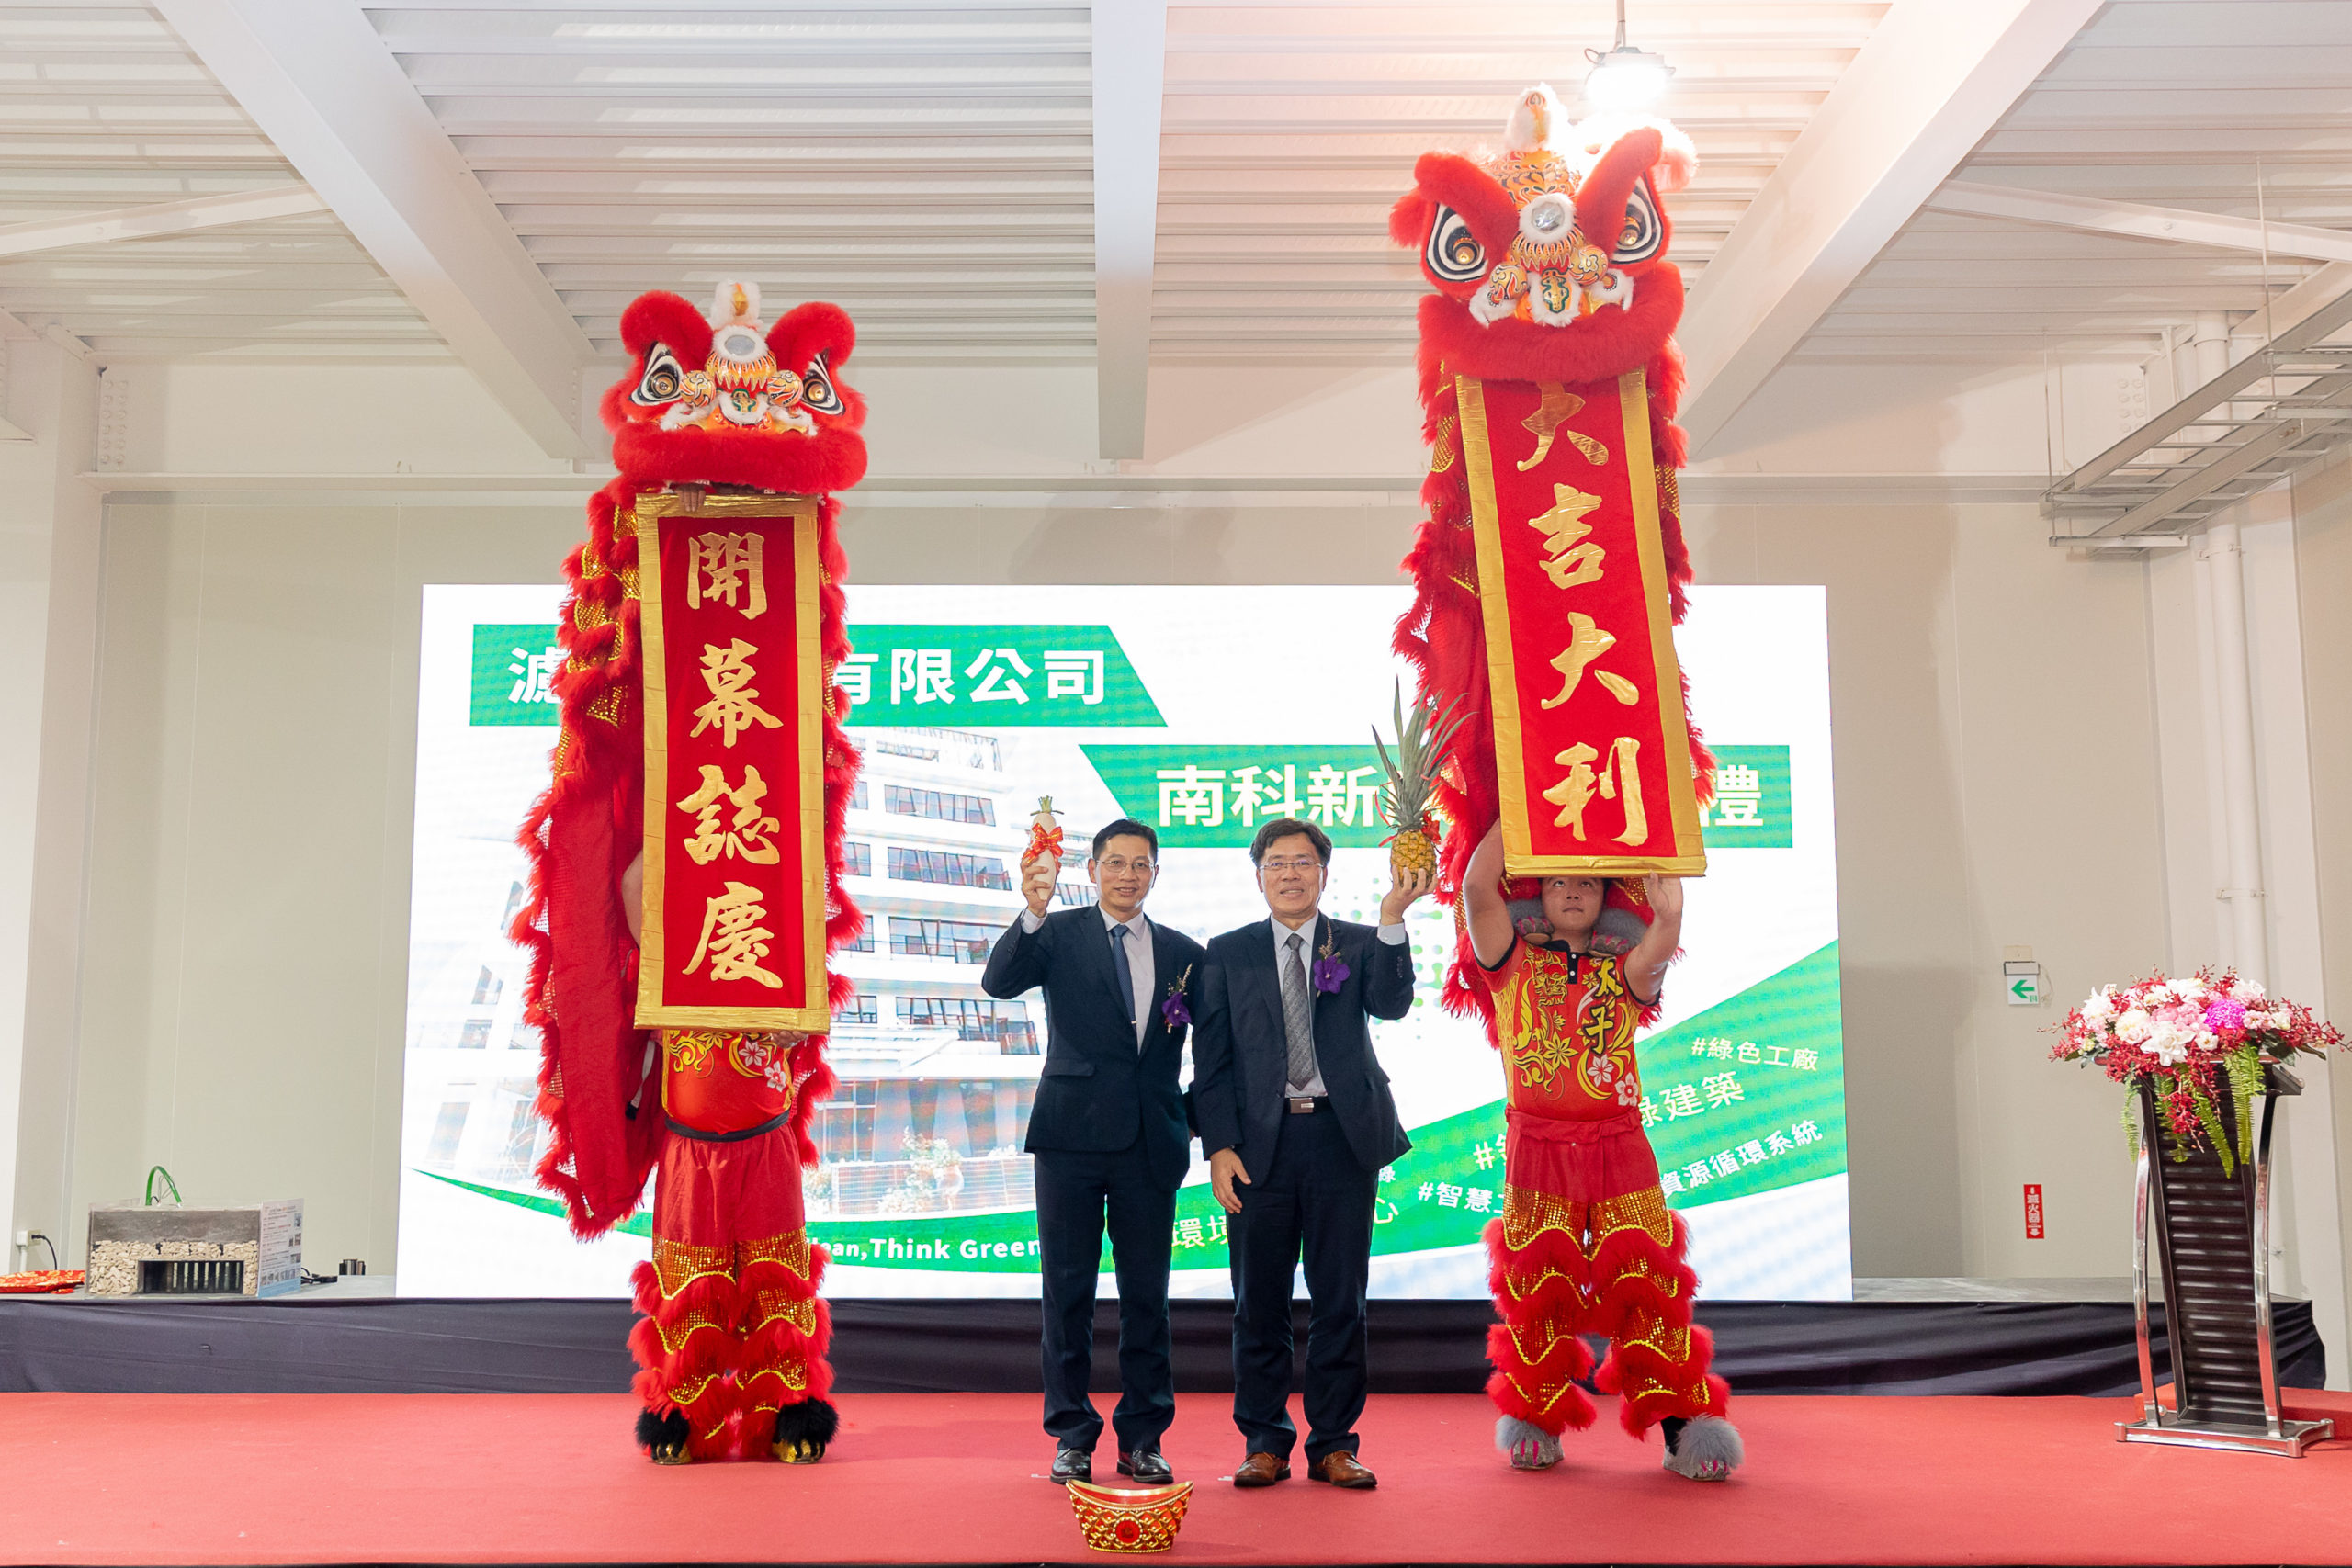 Greenfiltec's Chairman, Mr. Huang Ming-Wen (right), and General Manager, Mr. Huang Chi-Pao (left), received the auspicious lion dance performance as a symbolic gesture of prosperity and good fortune.